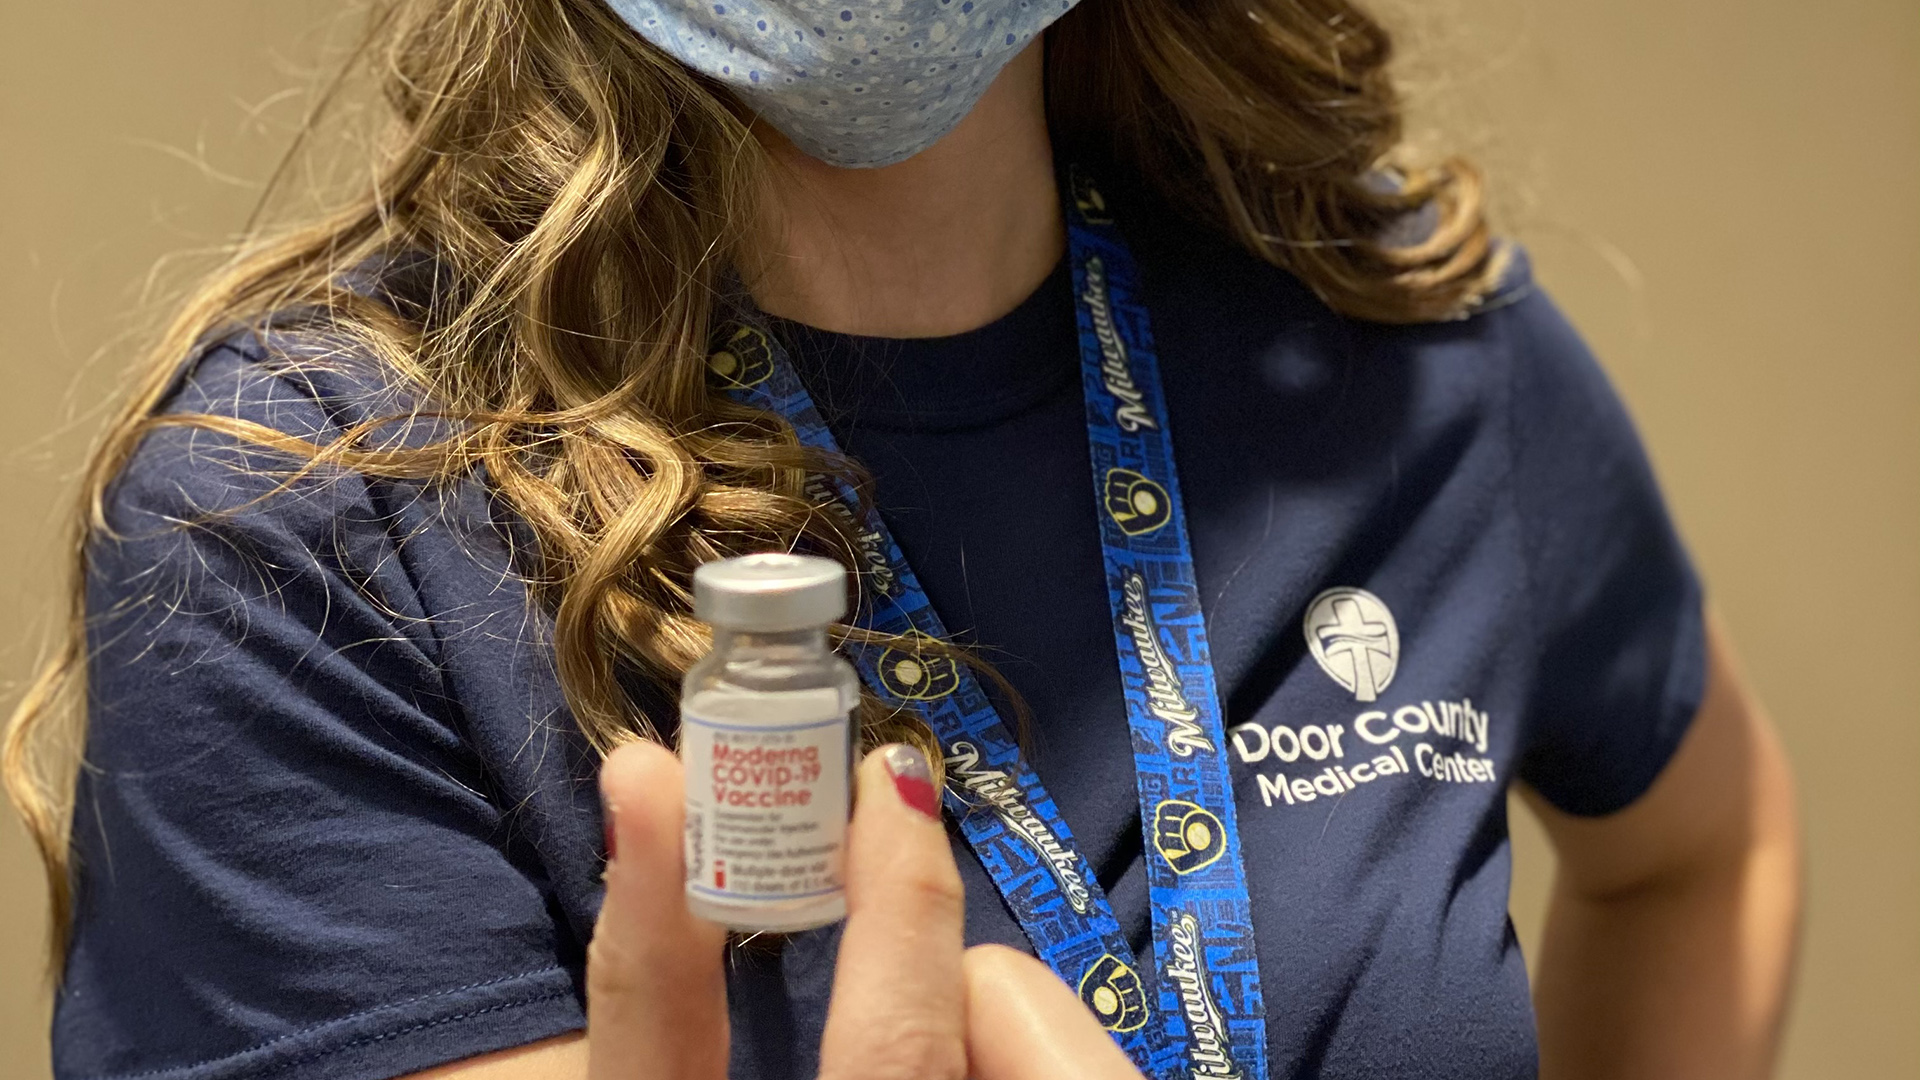 A Door County Medical Center staffer holds a vial of a COVID-19 vaccine.